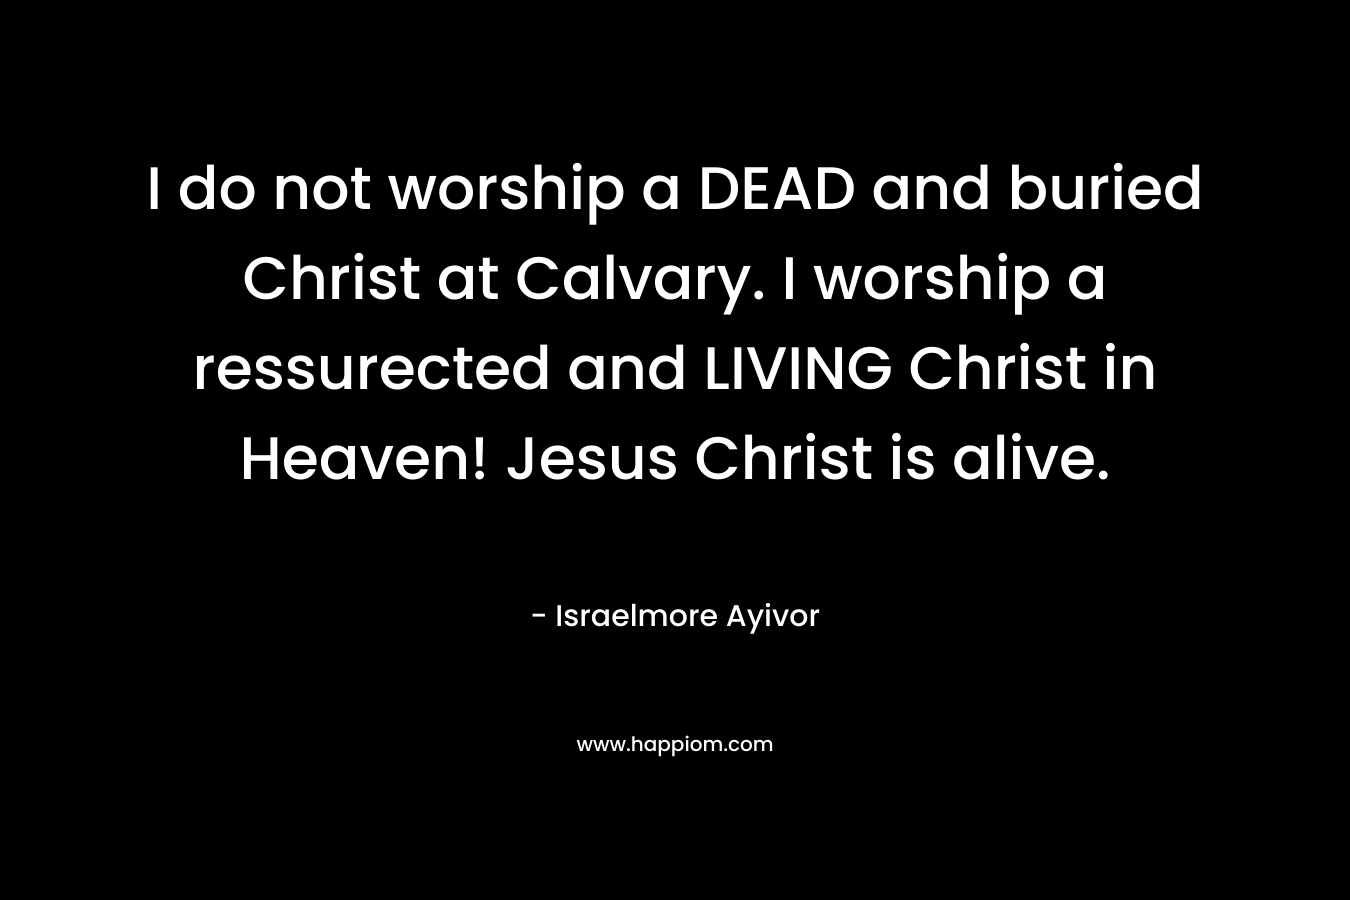 I do not worship a DEAD and buried Christ at Calvary. I worship a ressurected and LIVING Christ in Heaven! Jesus Christ is alive. – Israelmore Ayivor